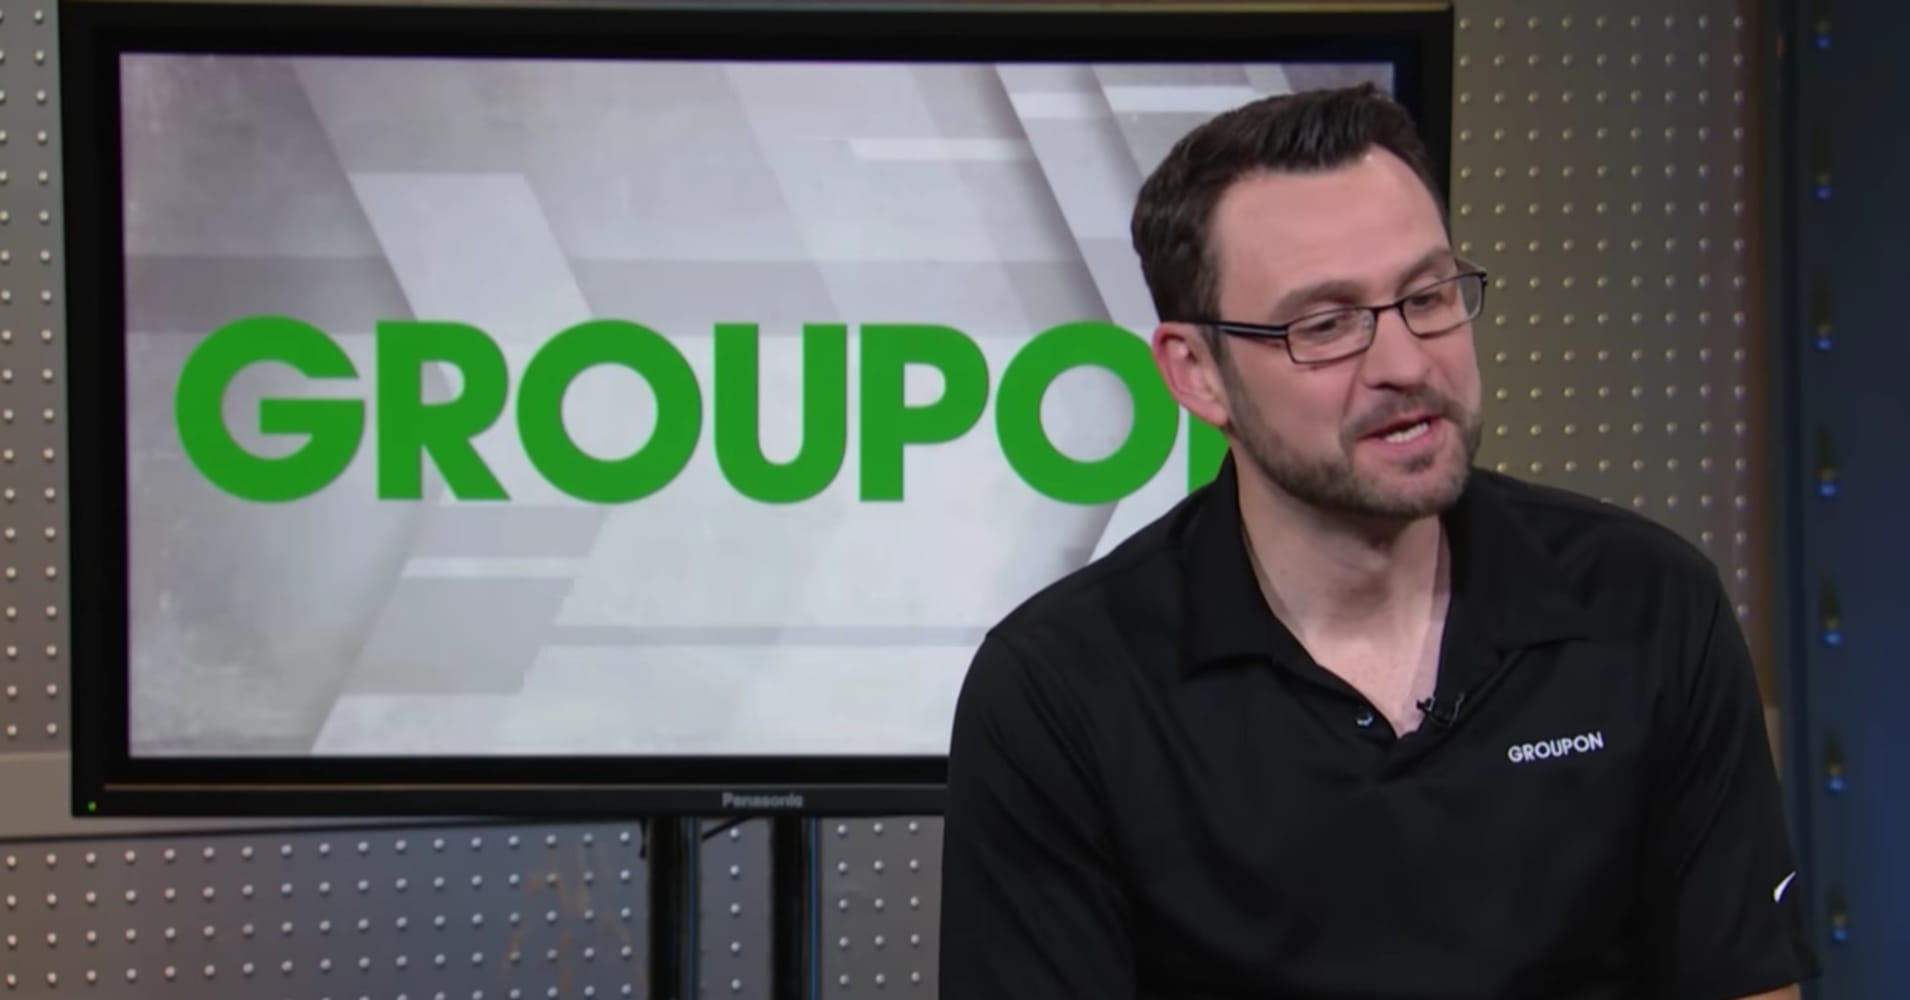 Groupon CEO warns young executives to 'beware of the limelight' - CNBC